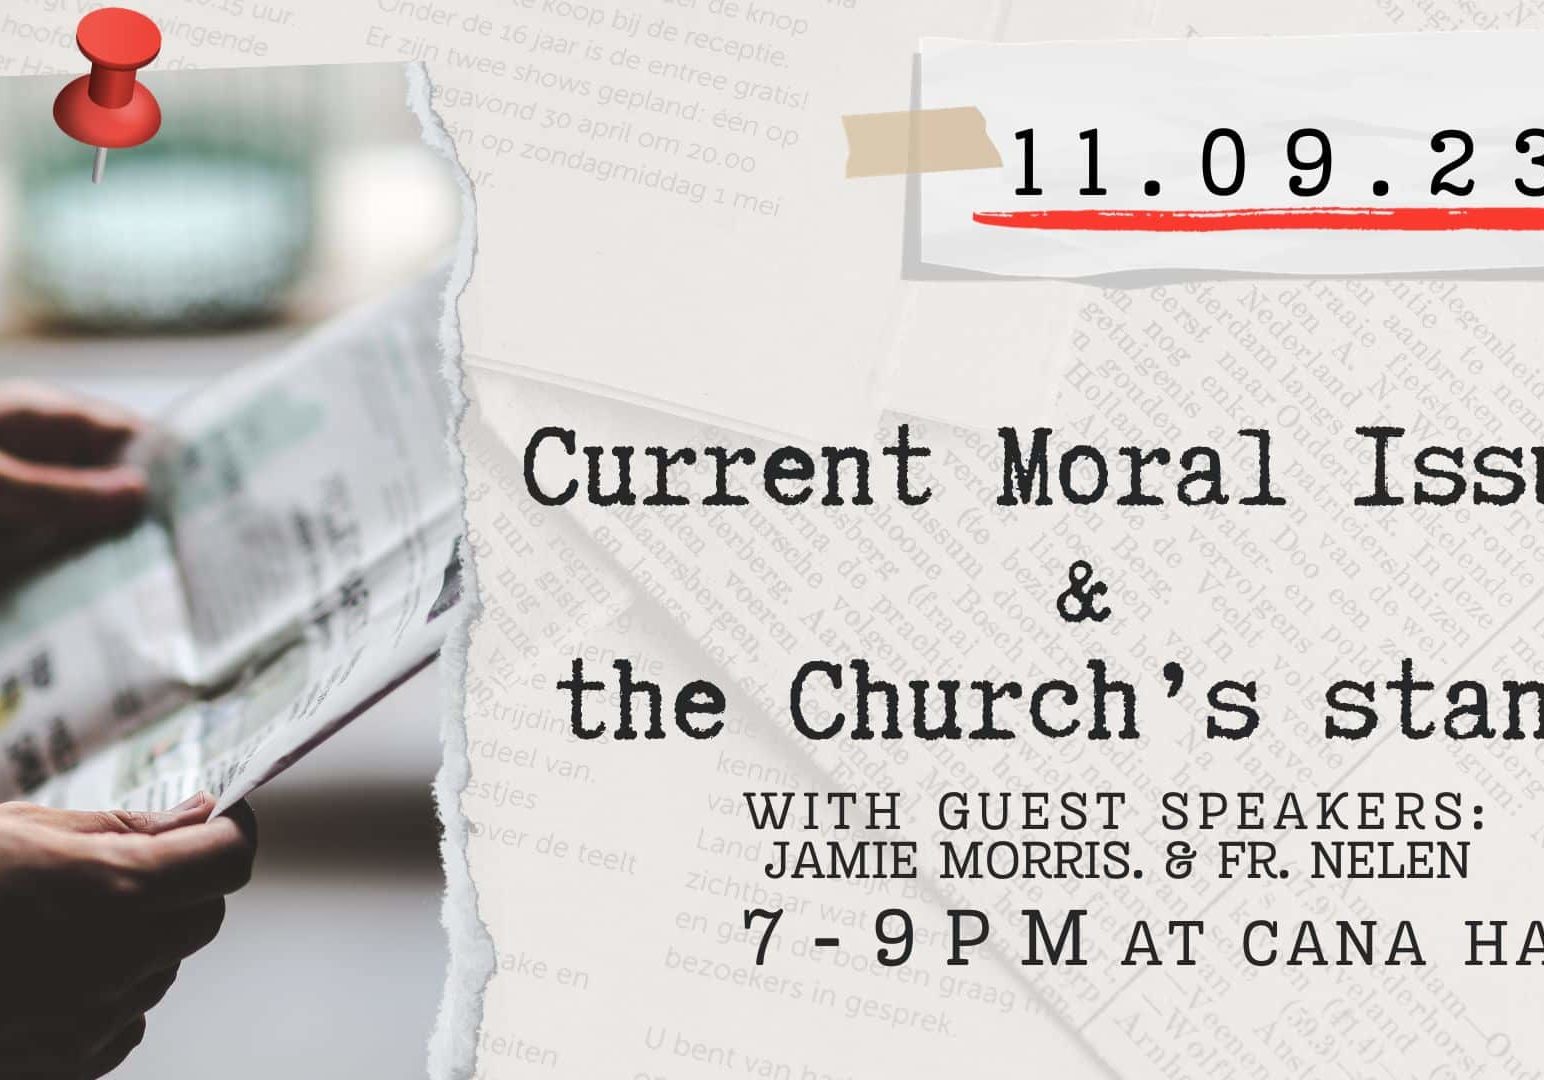 Moral Issues Event 2